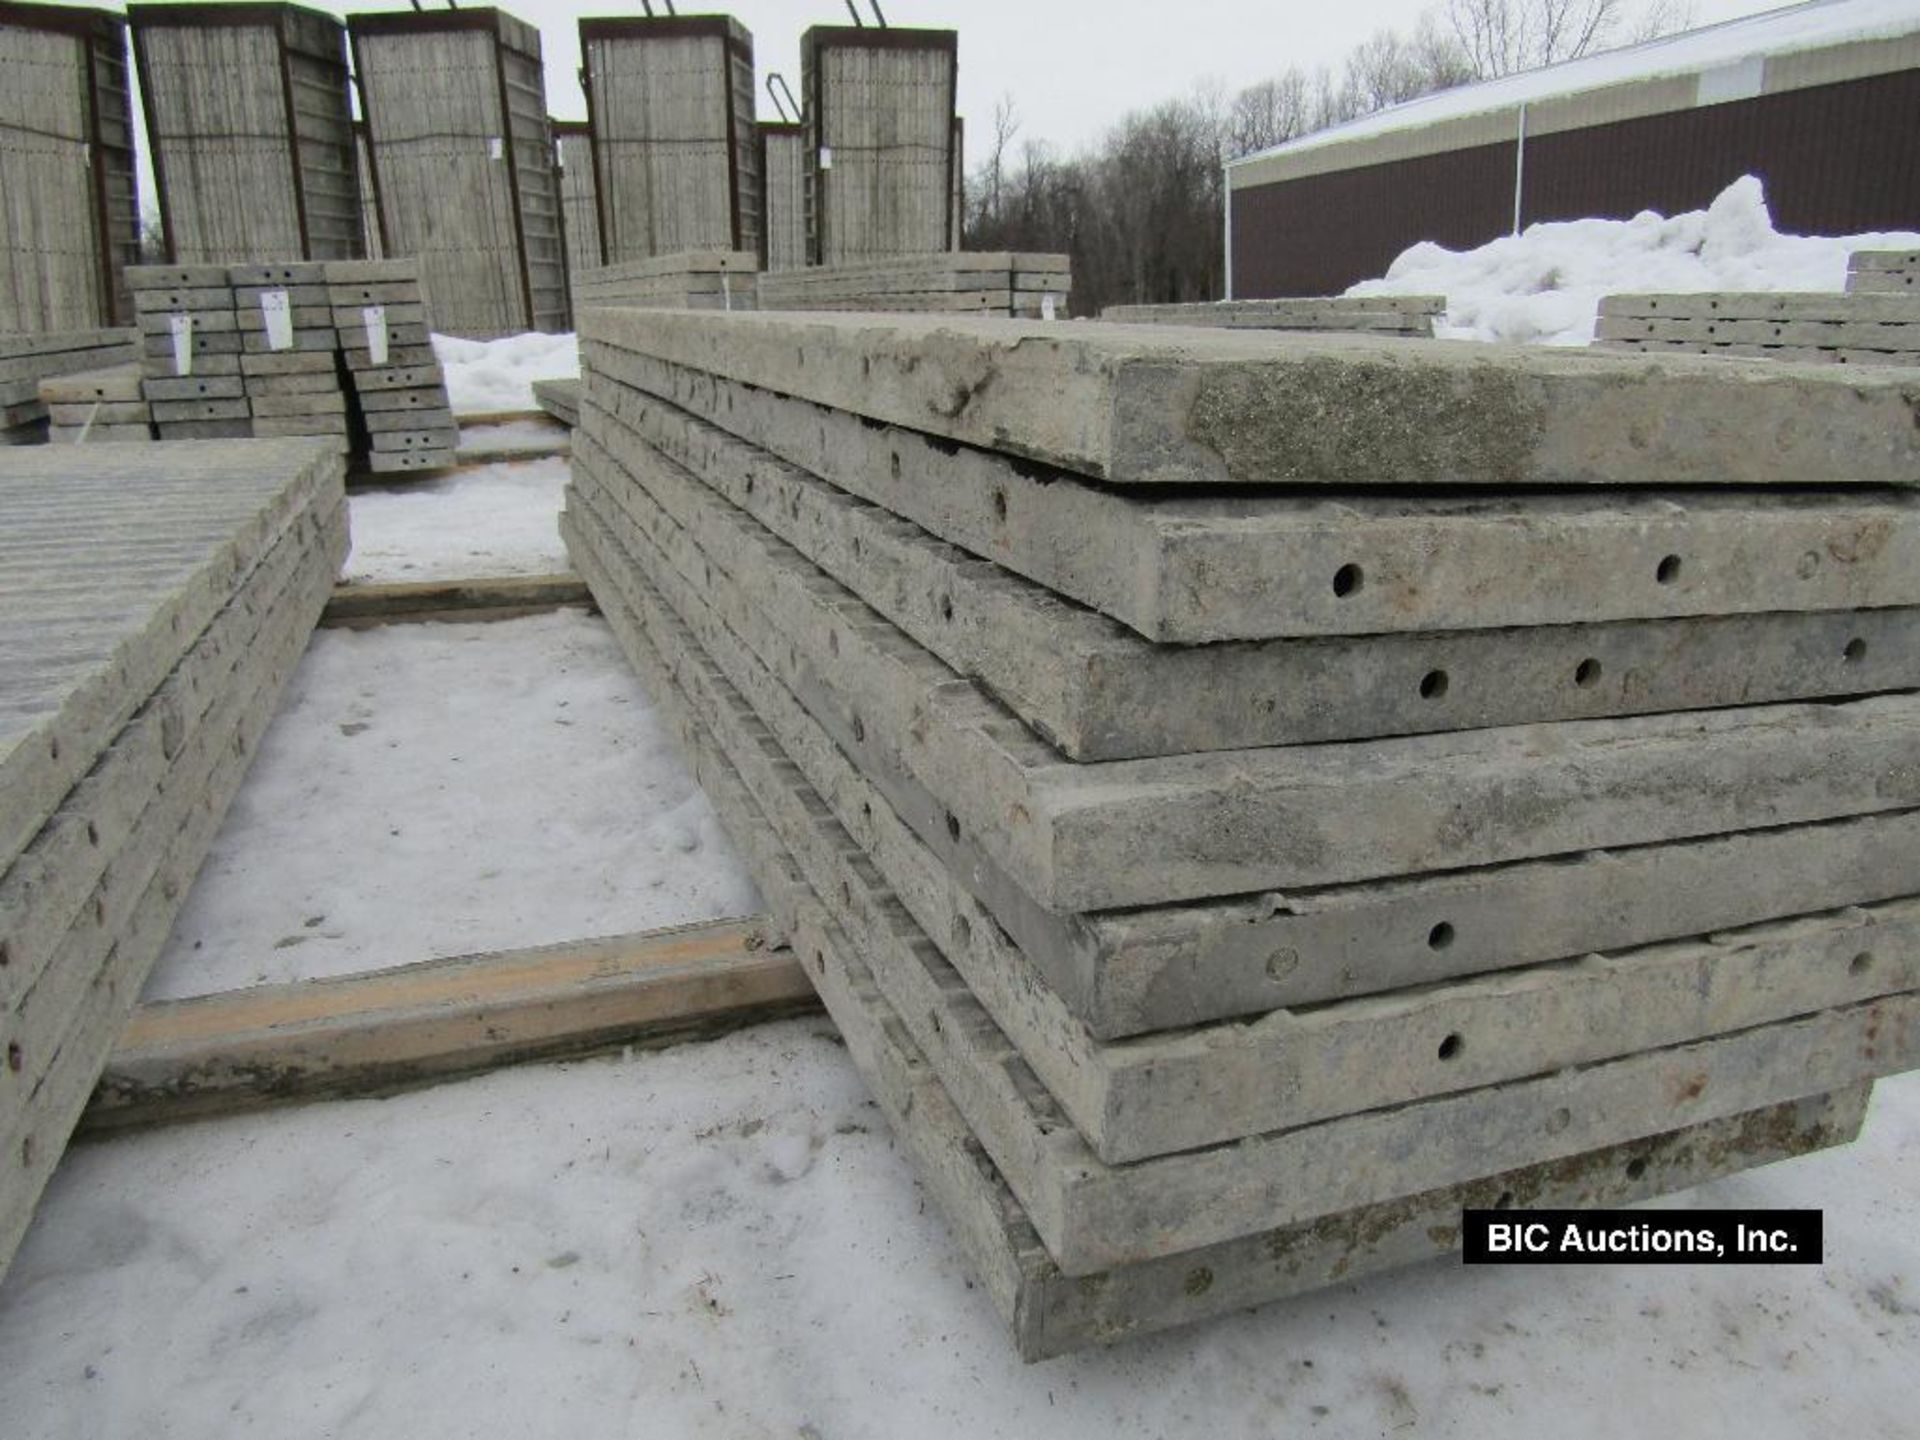 (8) 24" x 9' Durand Aluminum Concrete Forms, Textured Brick, 8" Hole Pattern, Located in Waldo, WI - Image 2 of 2